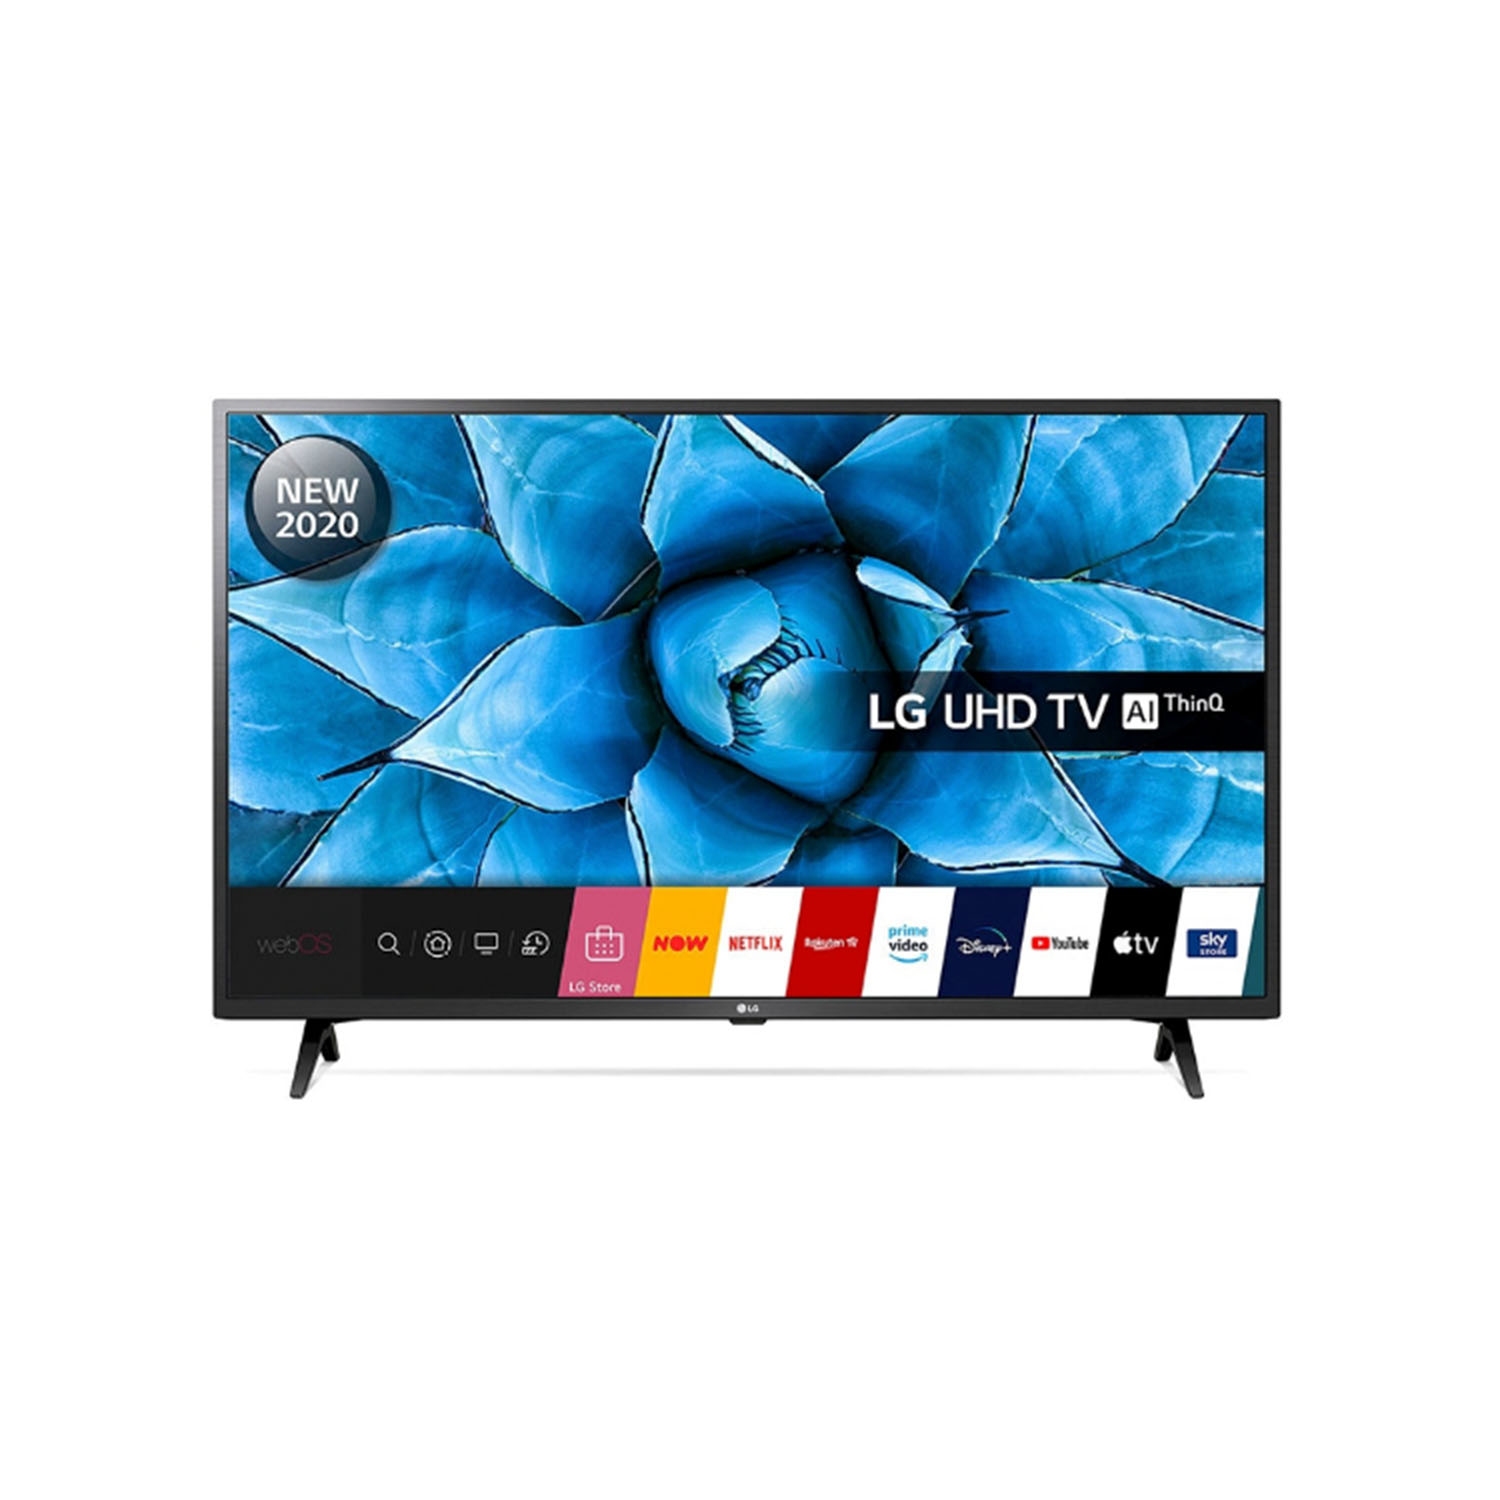 LG 43UN73006LC 43" 4K Ultra HD LED Smart TV with Ultra Surround Sound - 0